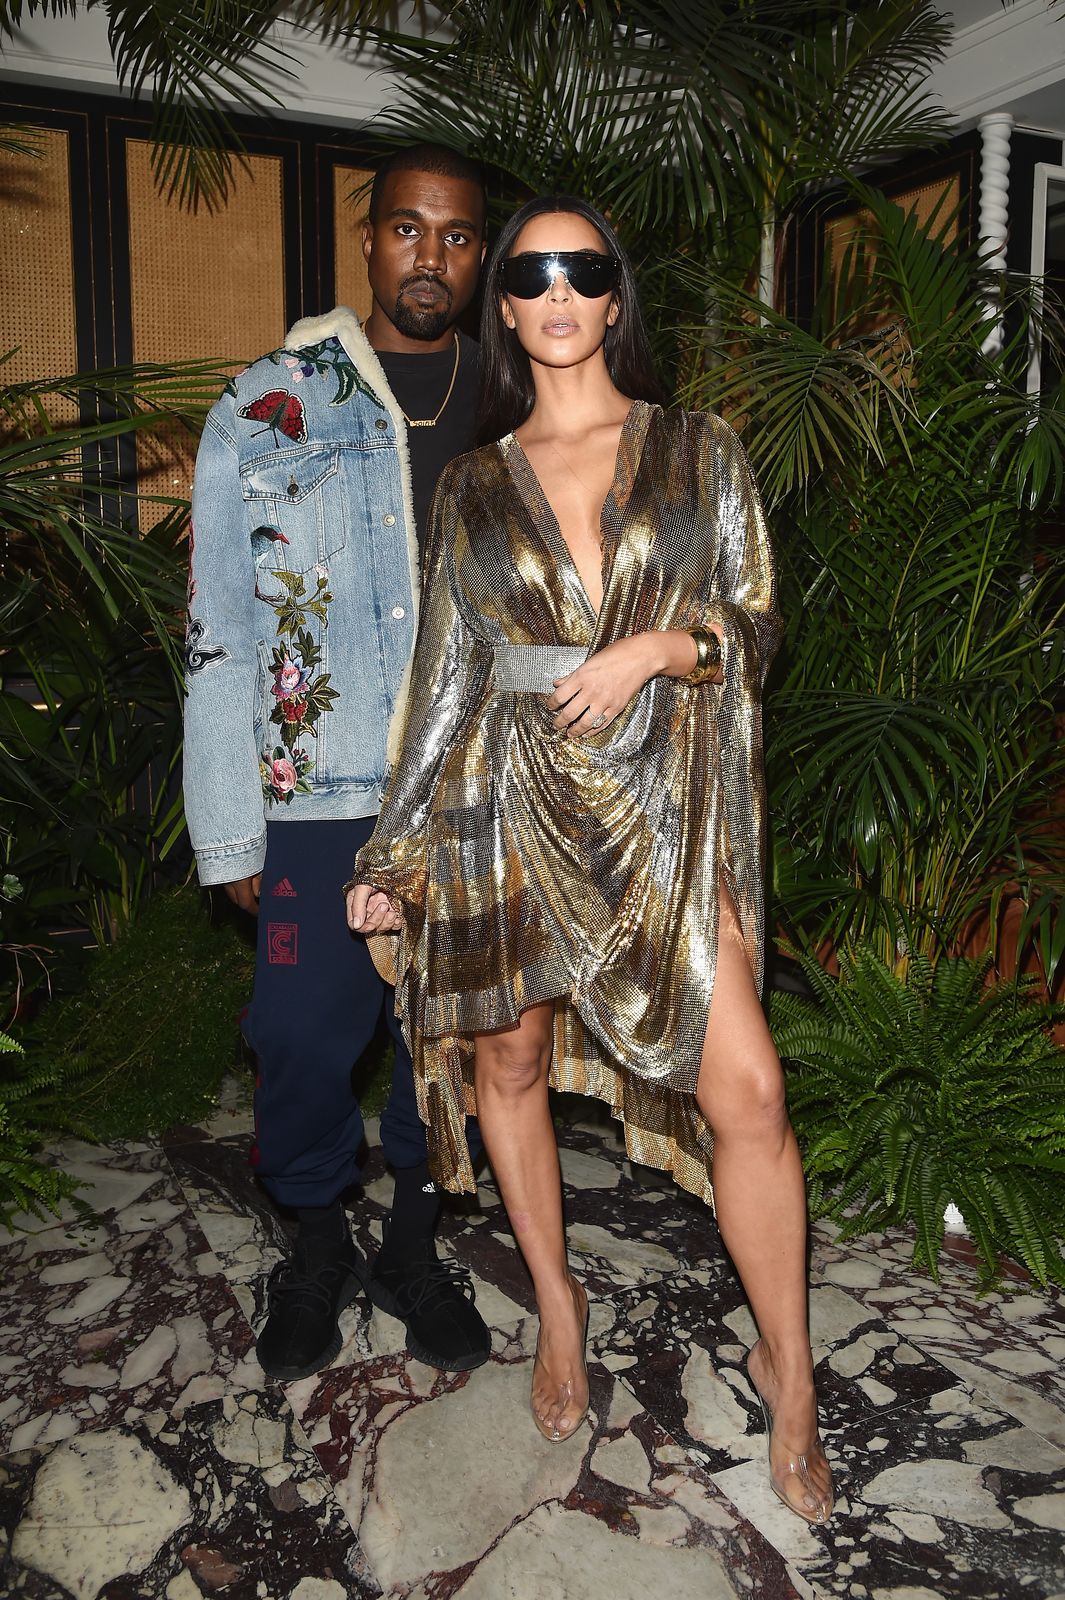 Kanye West & Kim Kardashian at the Balmain aftershow party during the Paris Fashion Week on Sept. 29, 2016 France | Photo: Getty Images